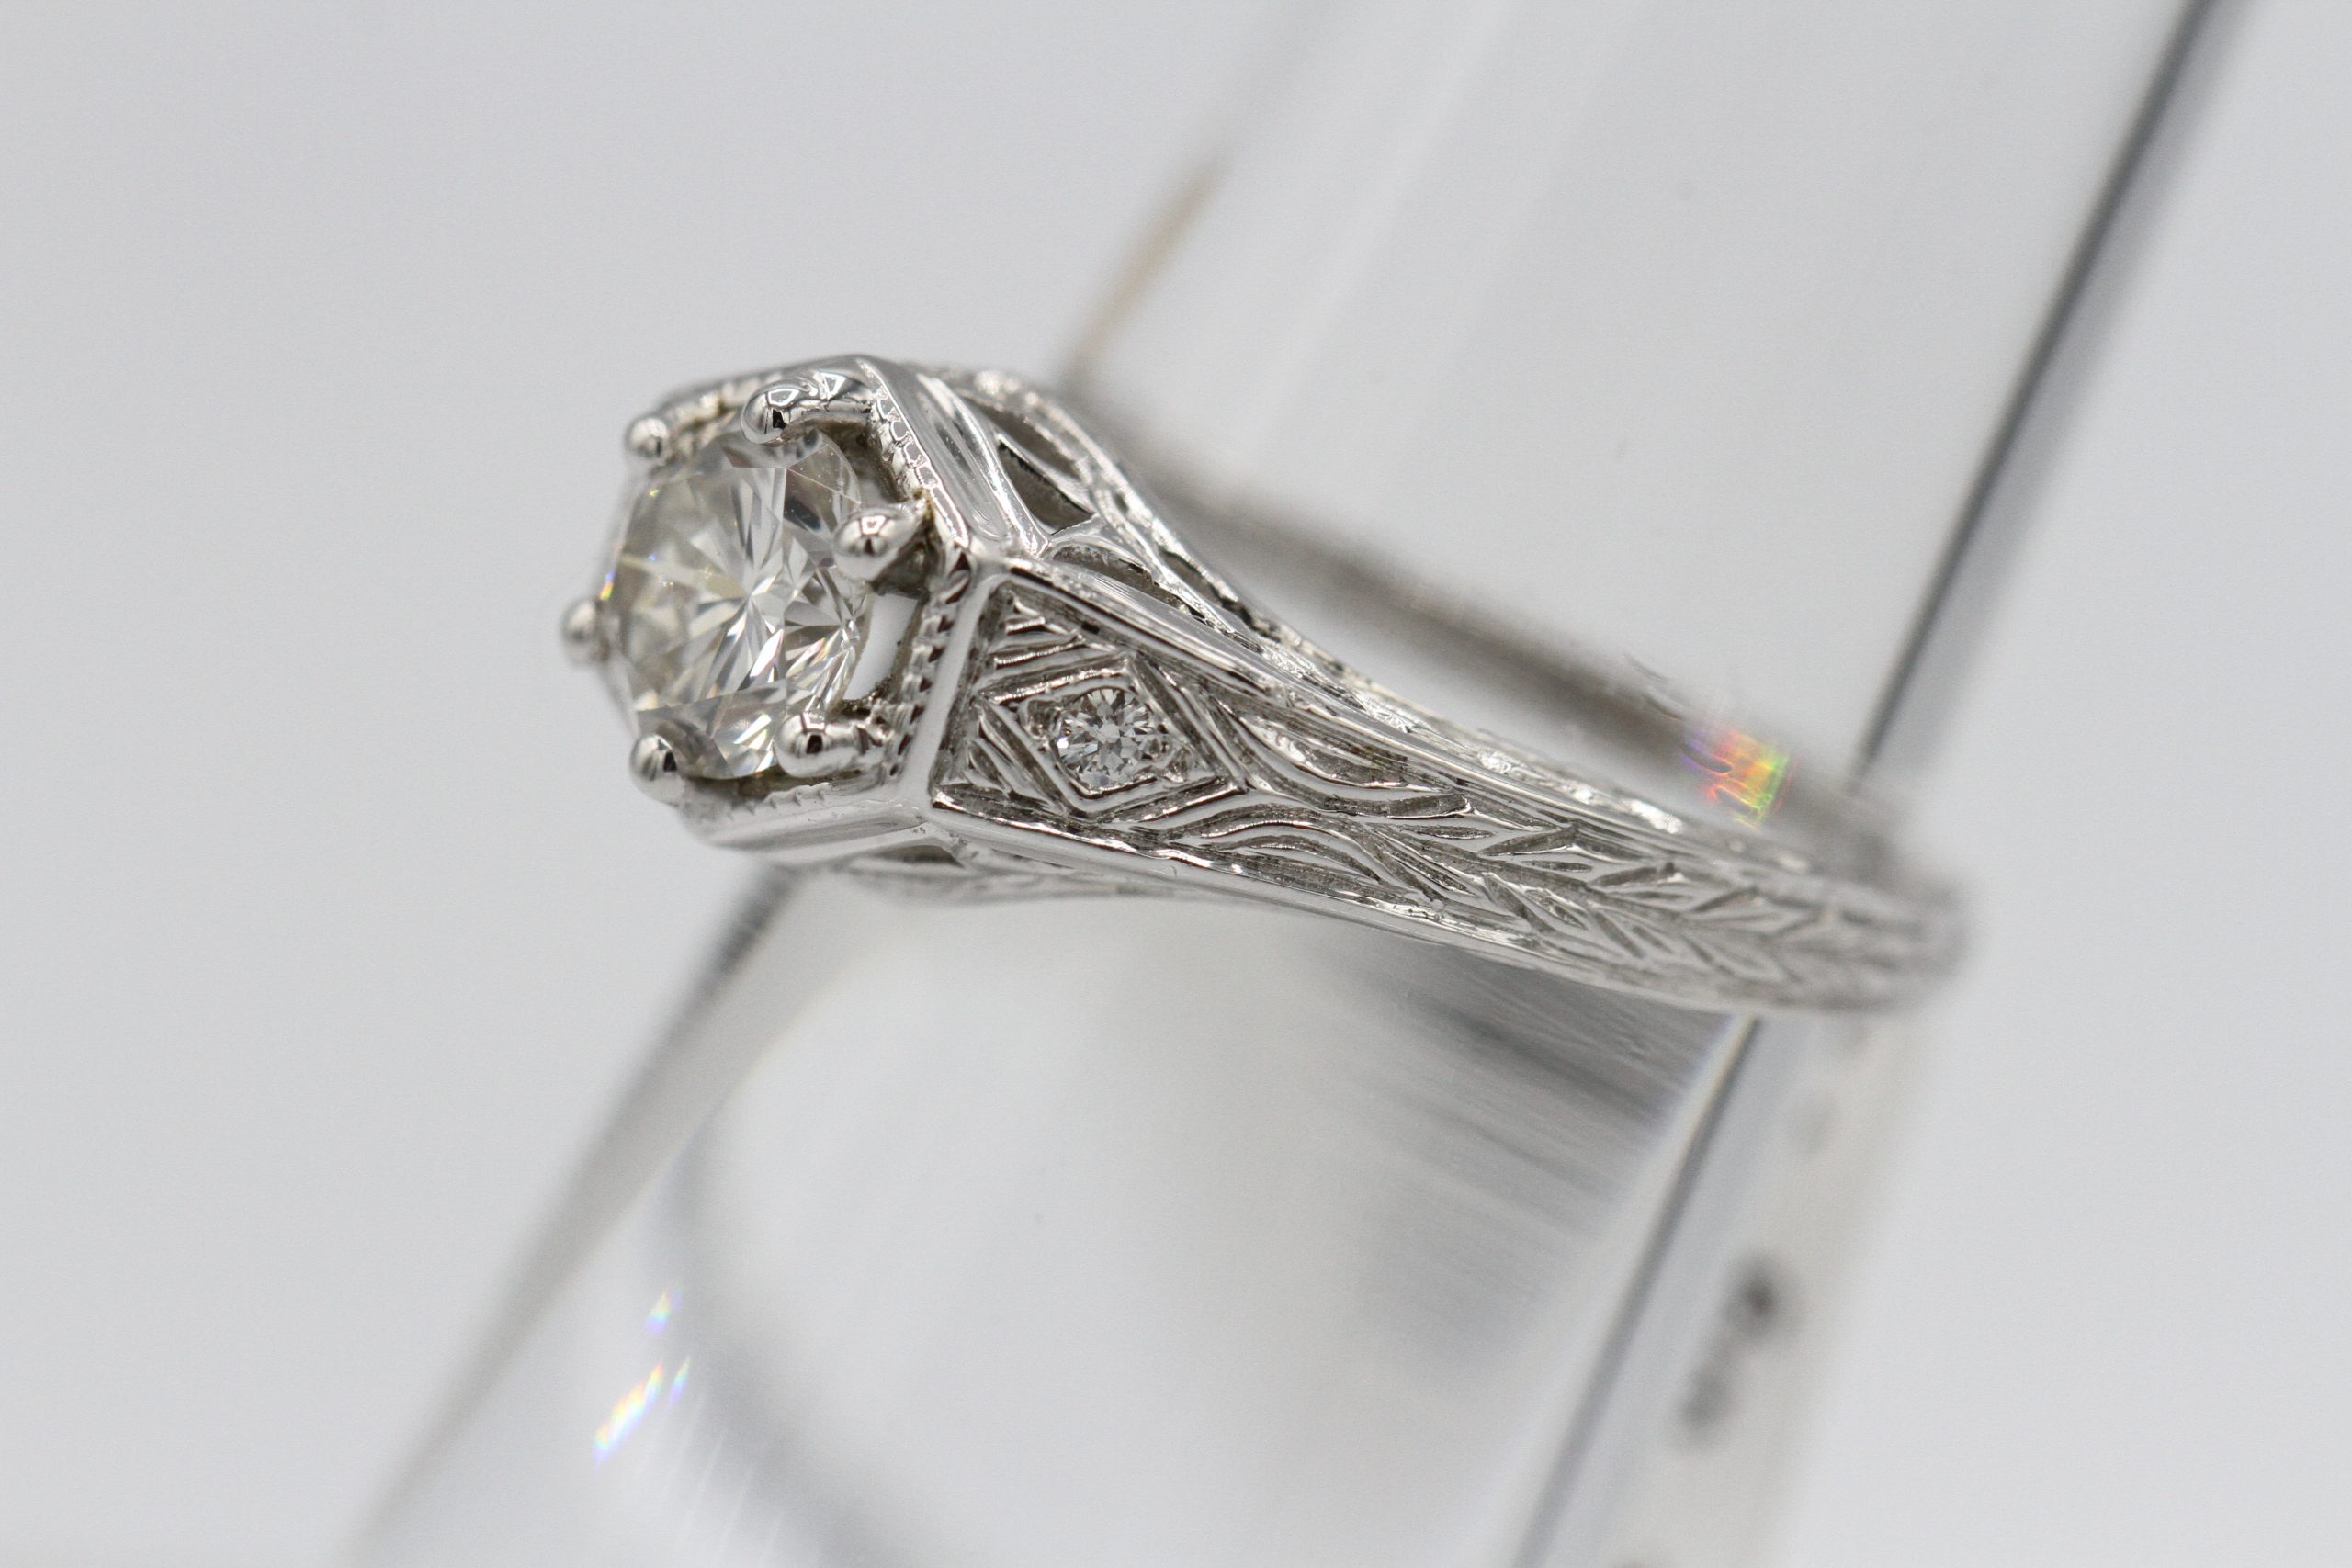 A large silver ring with a large diamond centerpiece